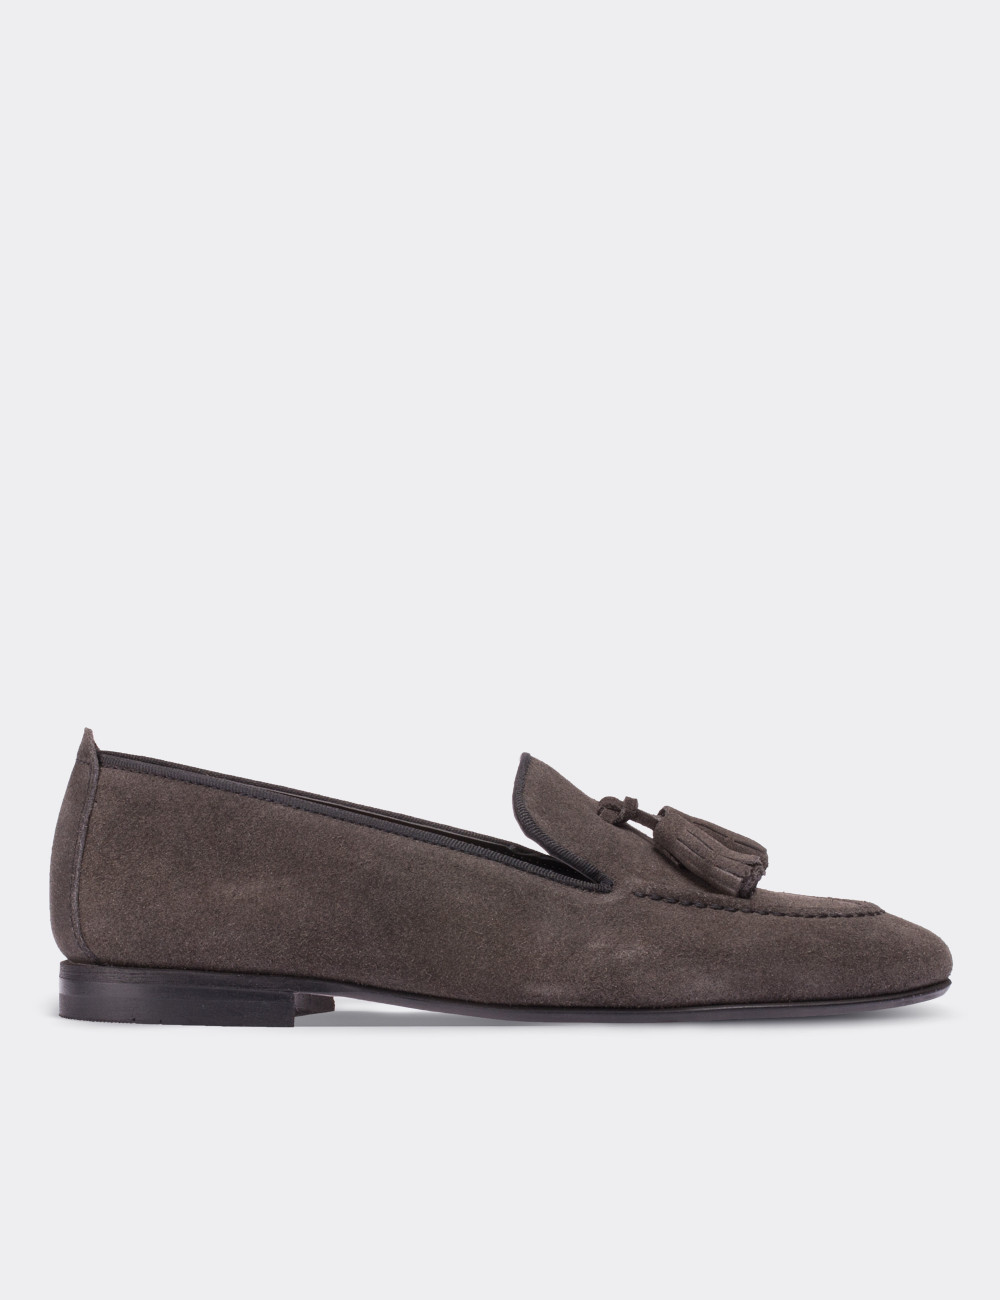 Brown Suede Leather Loafers - 01619ZKHVM01